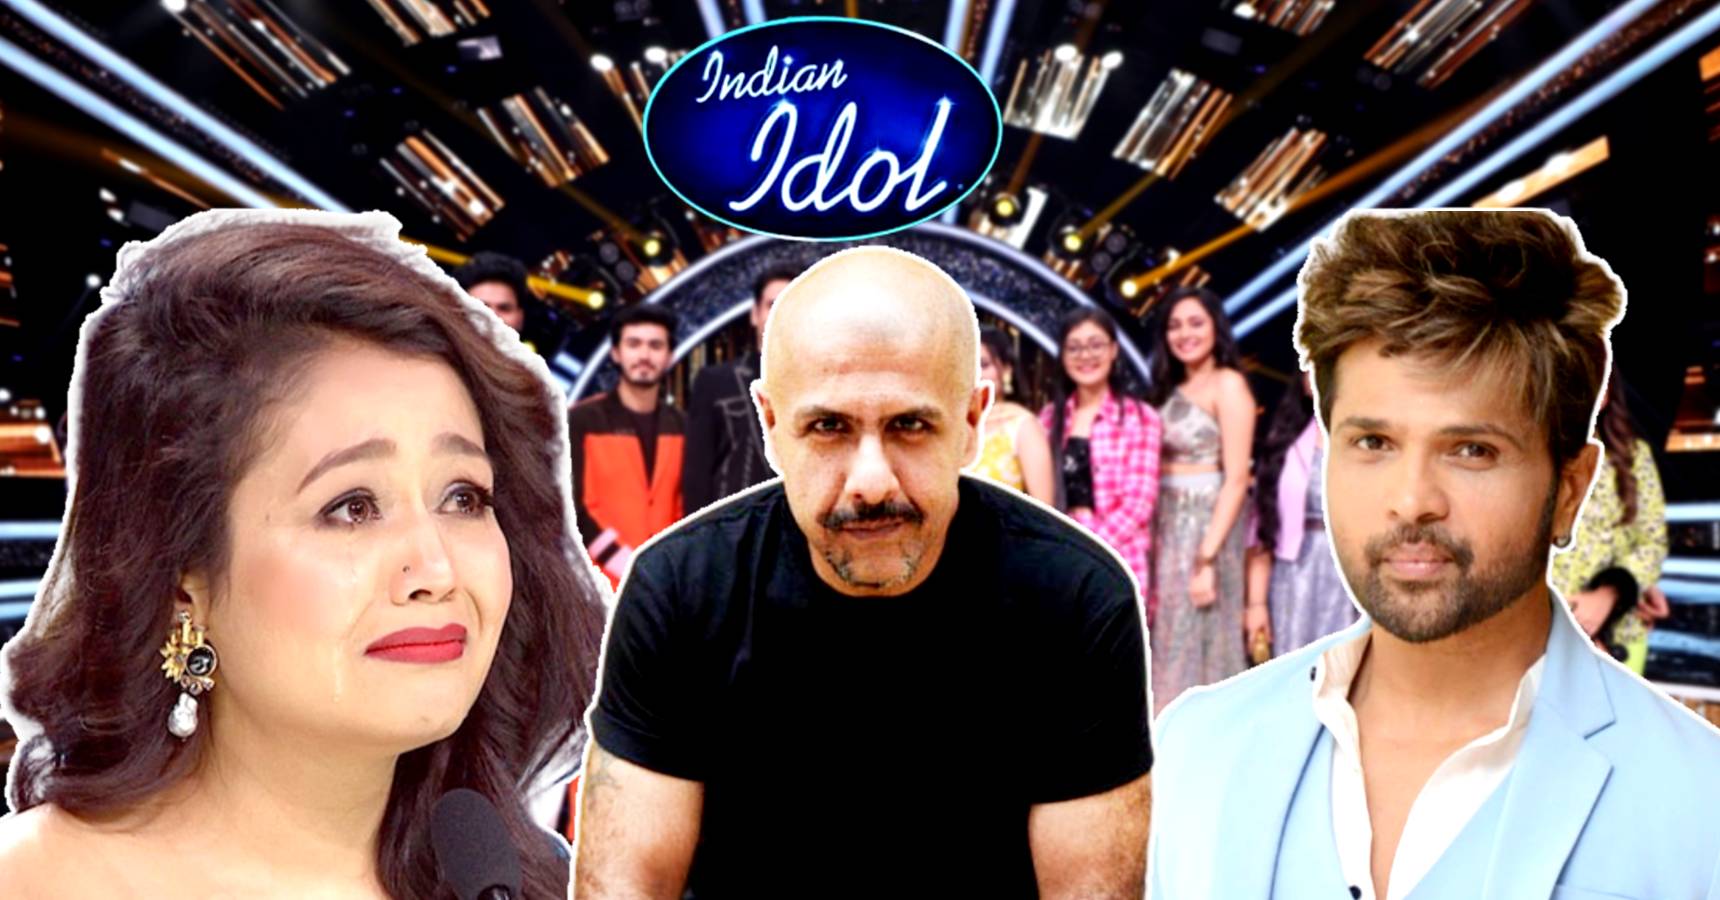 Indian Idol 13 running for past 7 months, audience got bored watching fake content